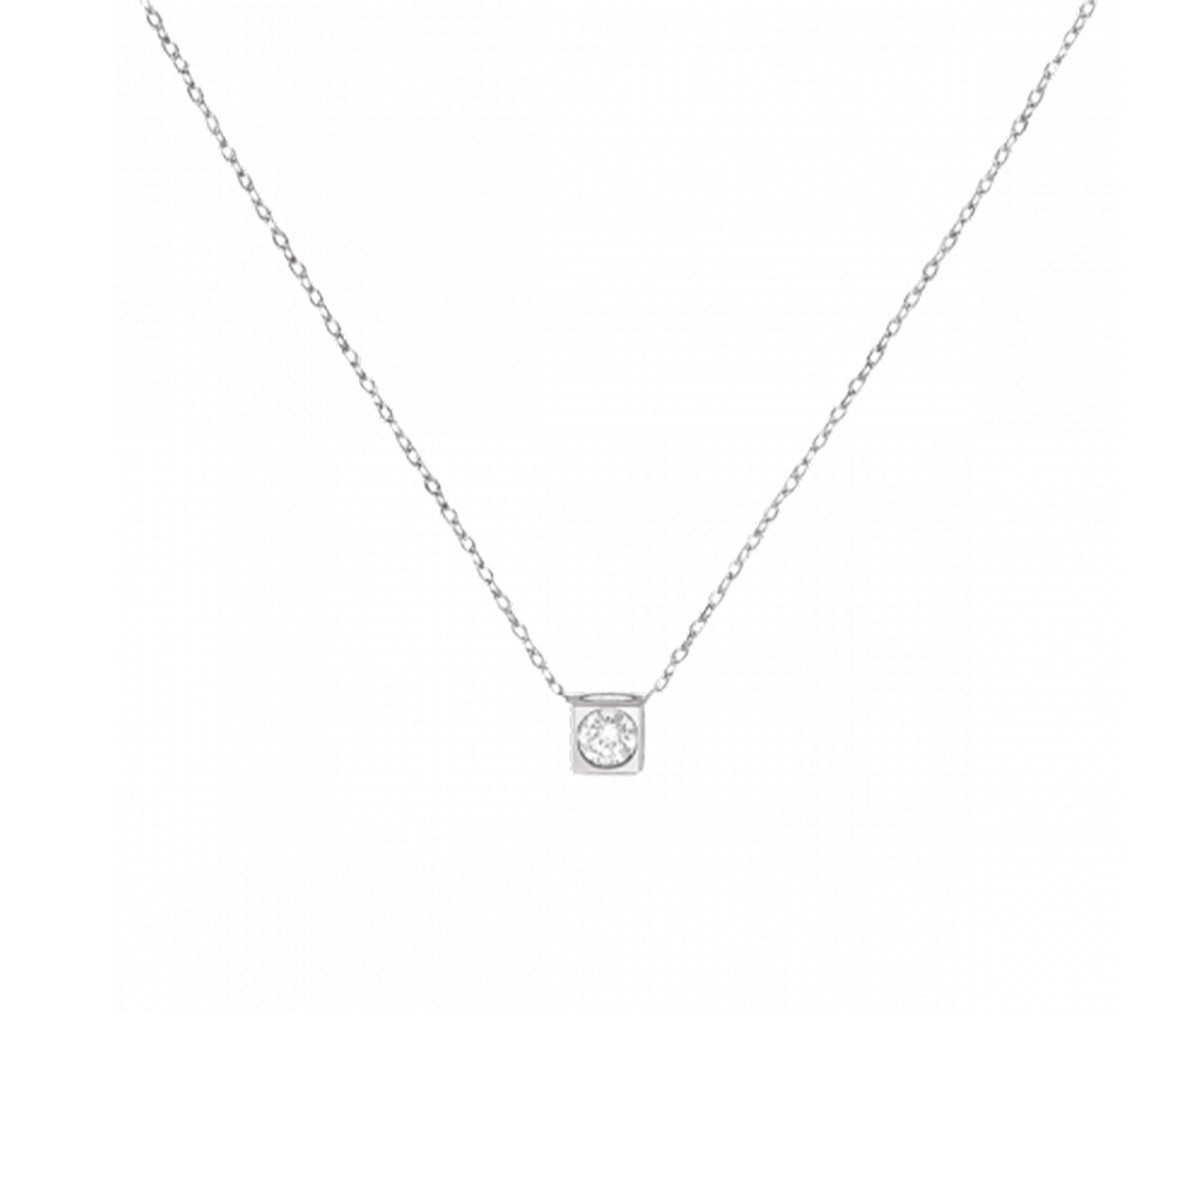 Dinh Van Le Cube 18K White Gold and Diamond Necklace-42002 Product Image